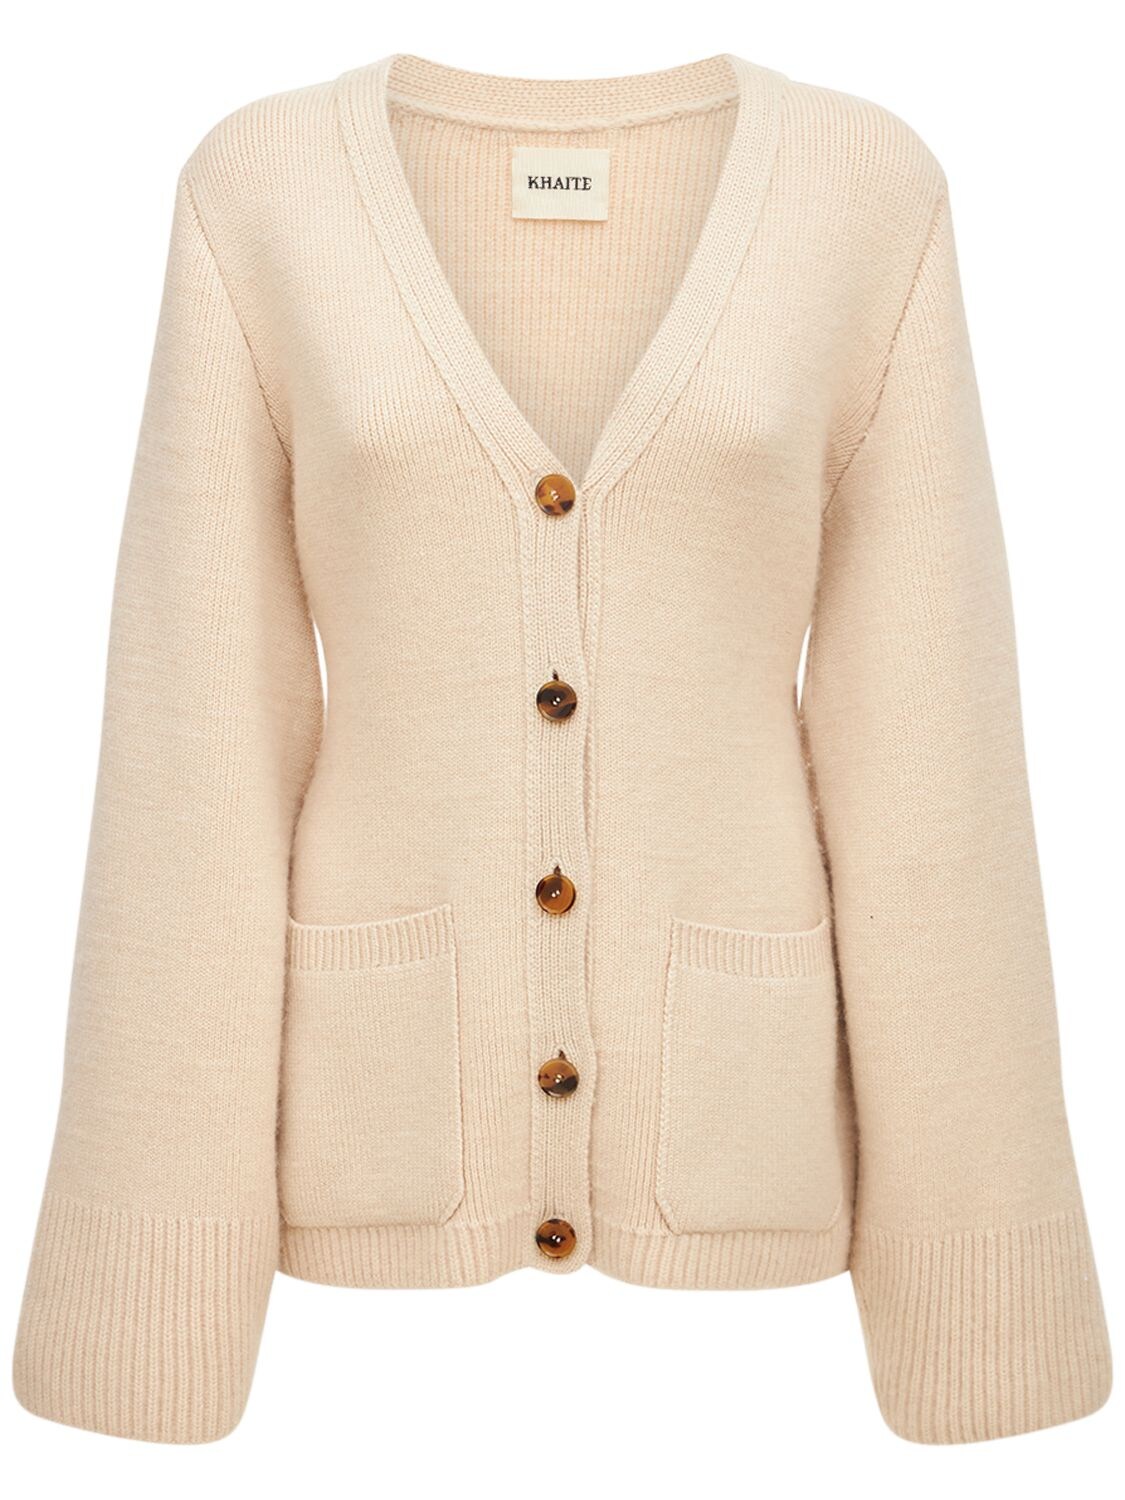 Khaite Lucy Cashmere Knit Cardigan In Ivory | ModeSens